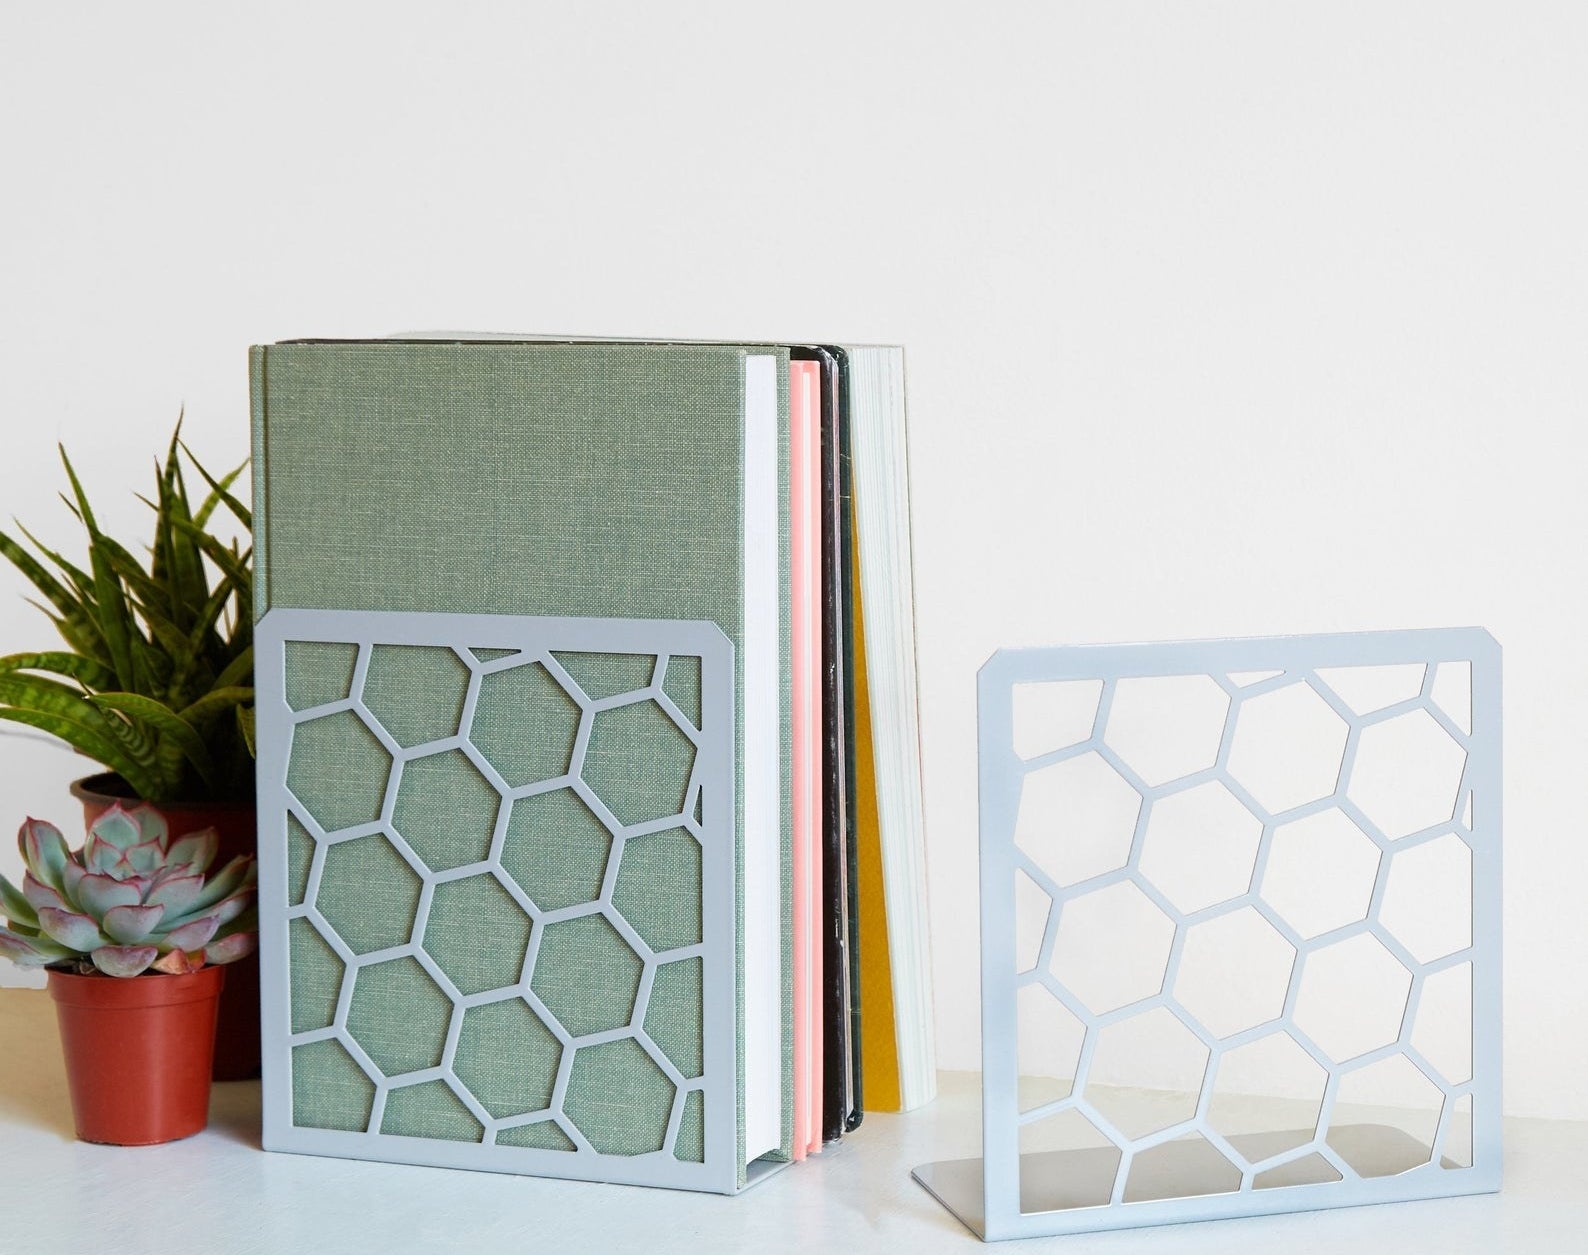 honeycomb book ends in pale blue